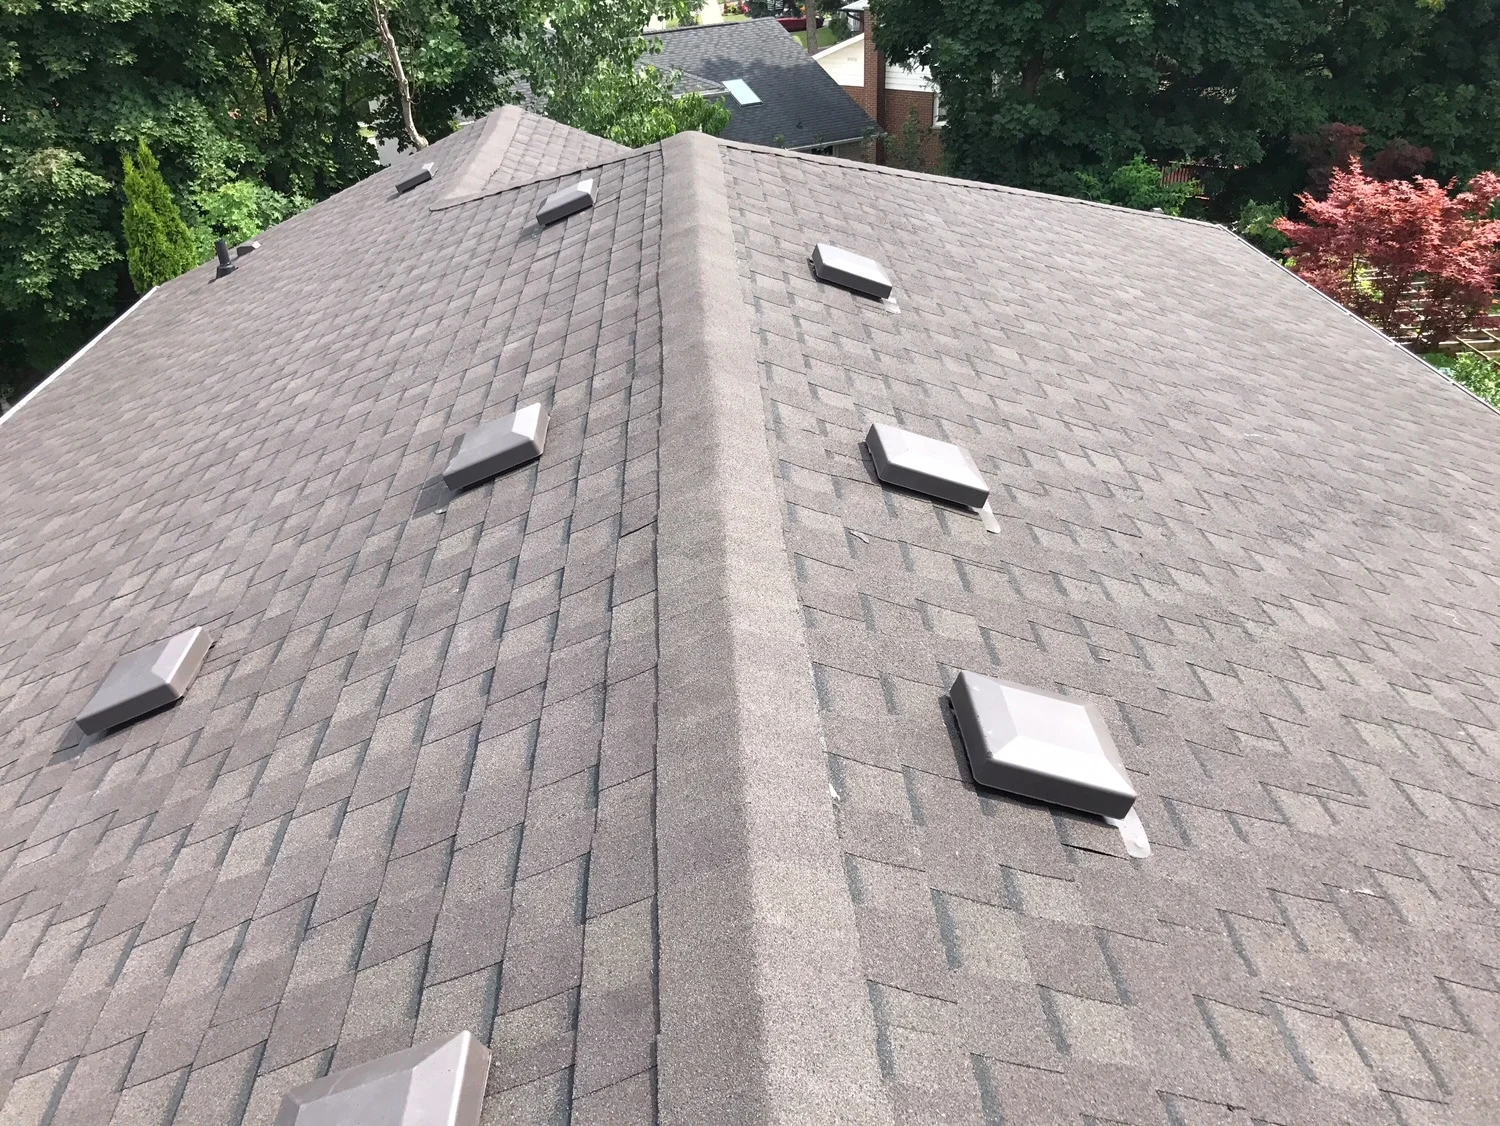 Shingle and roof vent install in Scarborough